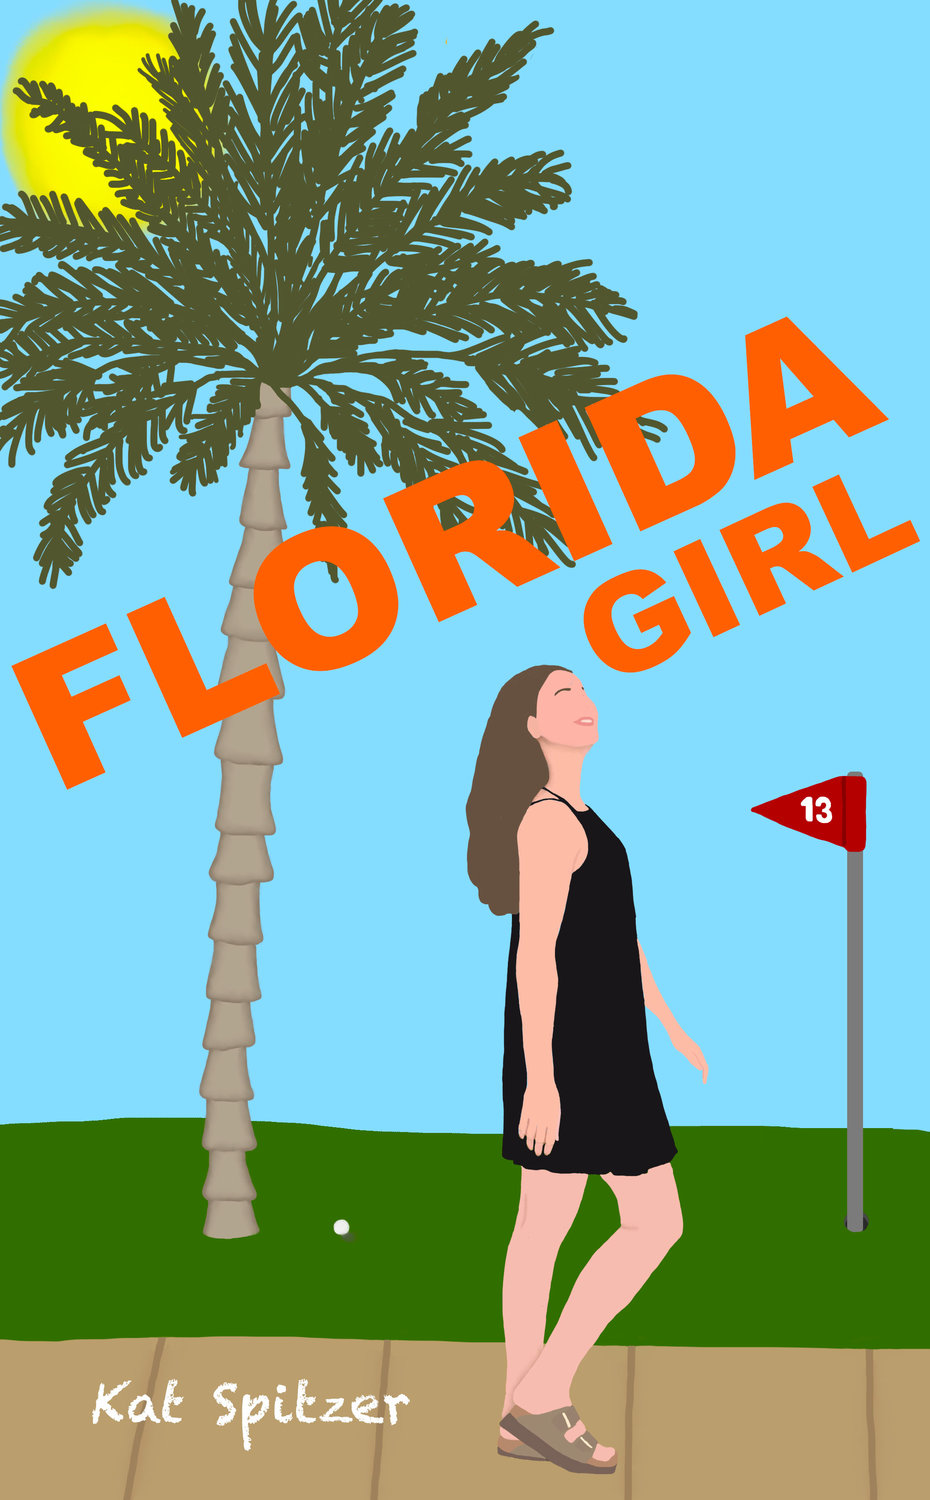 “Florida Girl” was inspired by the miniature golf course owned by Kat Spitzer’s family.